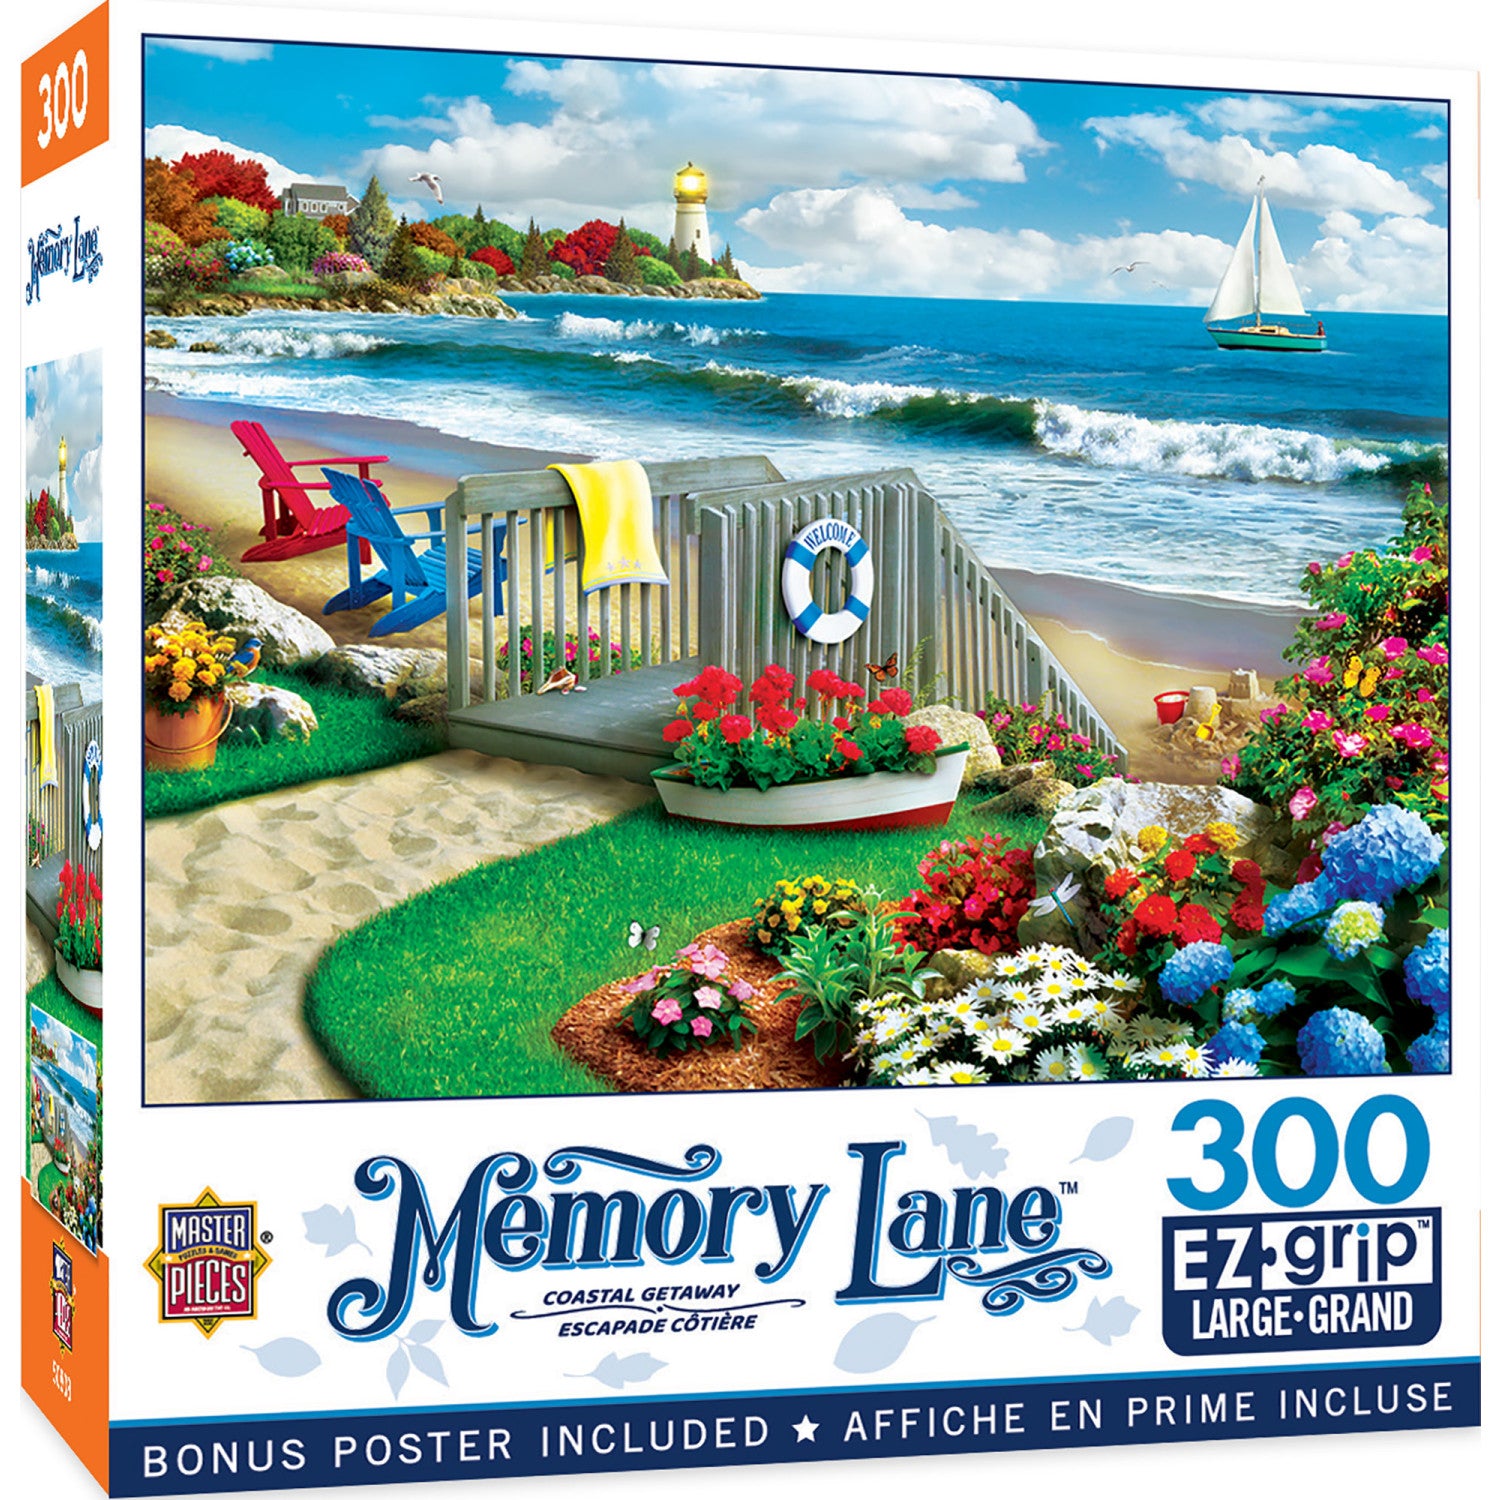  Masterpieces 300 Piece EZ Grip Jigsaw Puzzle - Day at The Lake  - 18x24 : Toys & Games